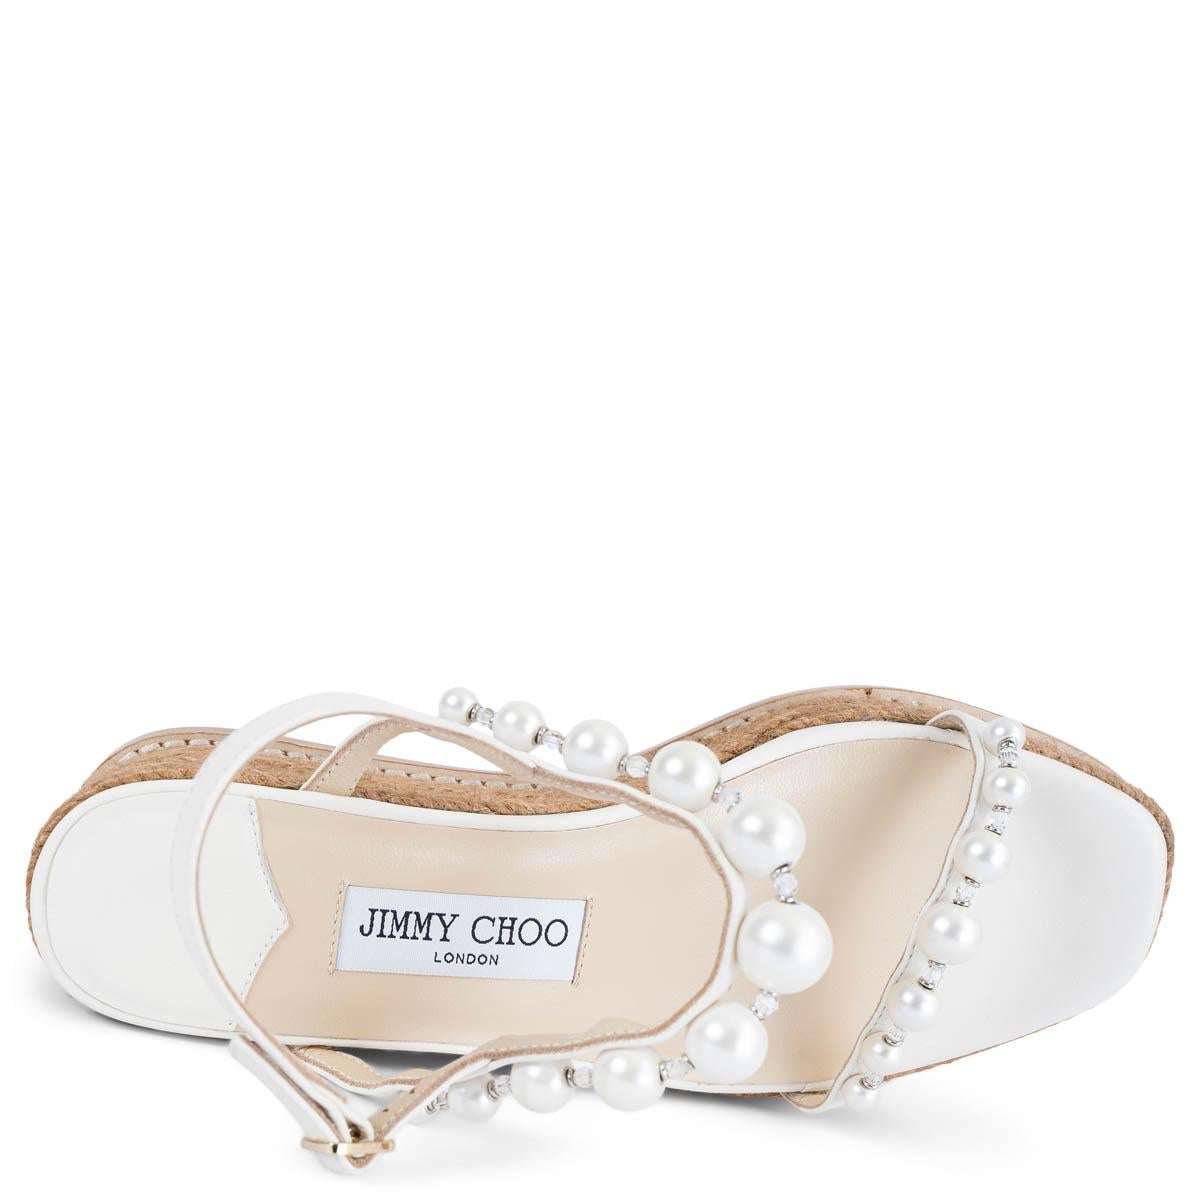 JIMMY CHOO Latte white leather AMATUUS 60 PEARL Wedge Sandals Shoes 37.5 For Sale 1